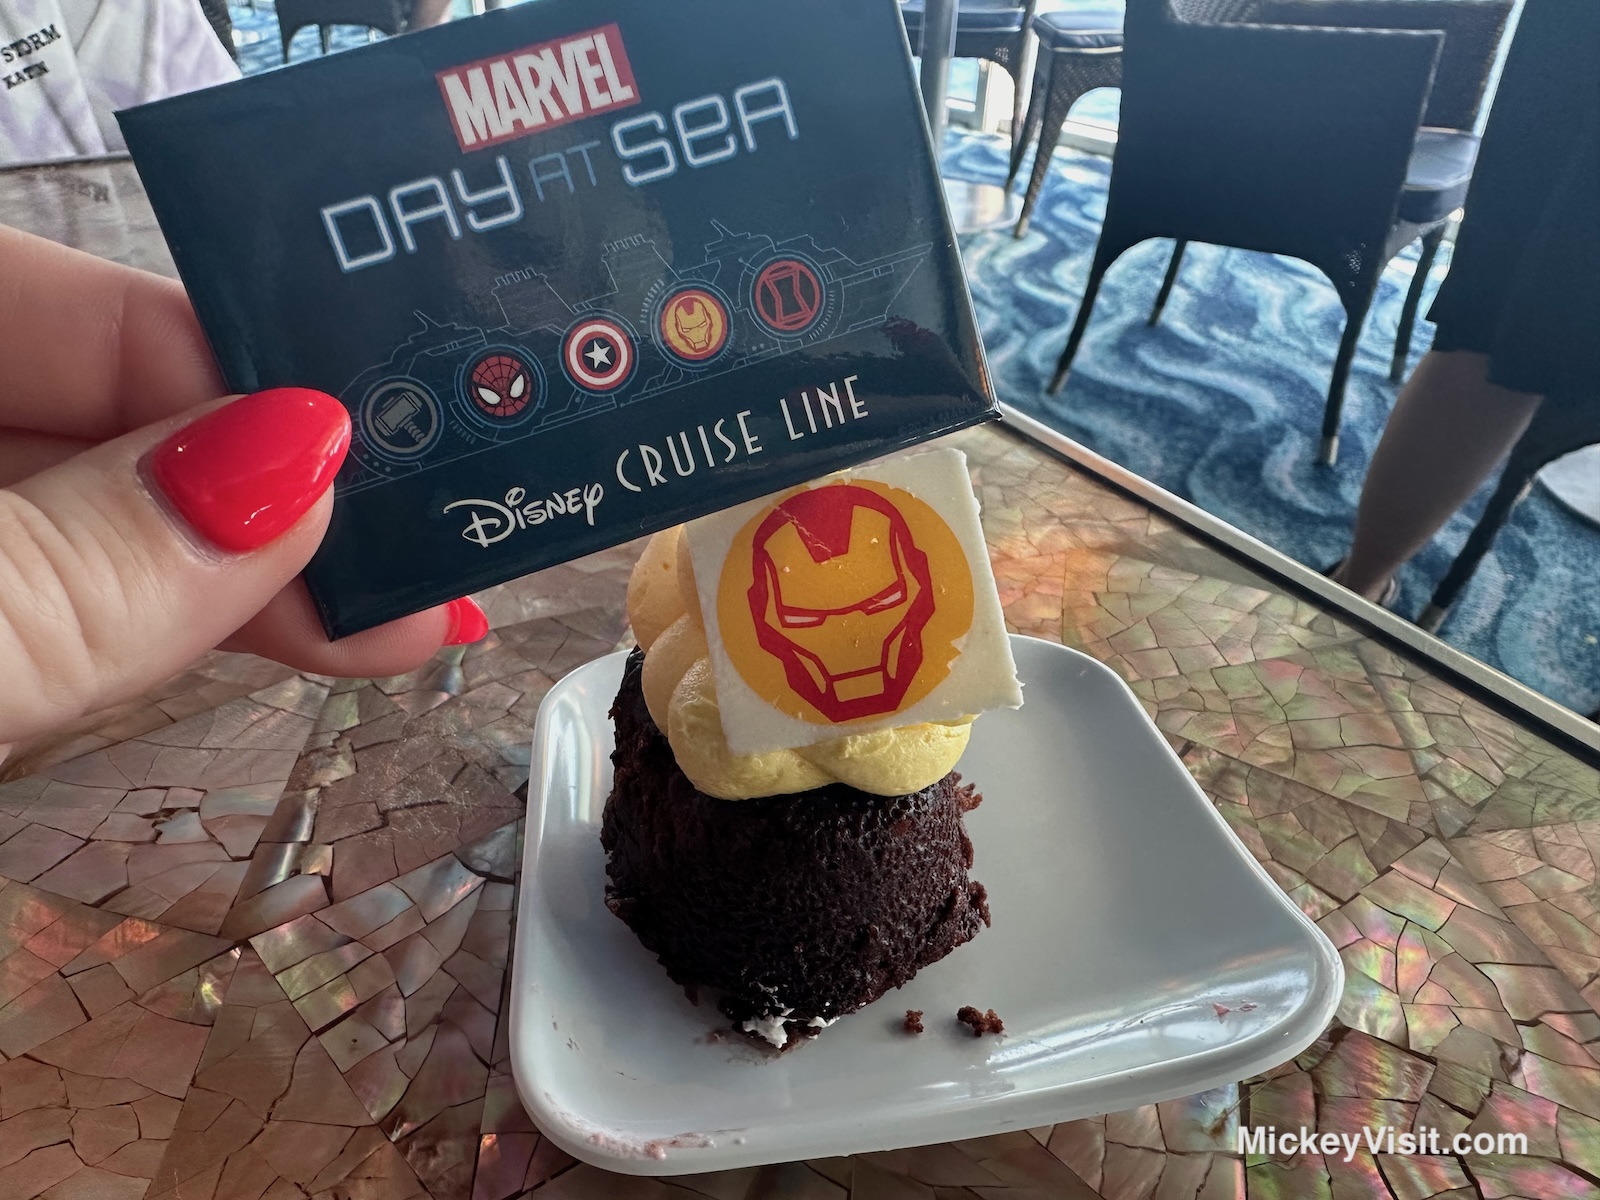 Marvel Day at Sea pin held over dessert